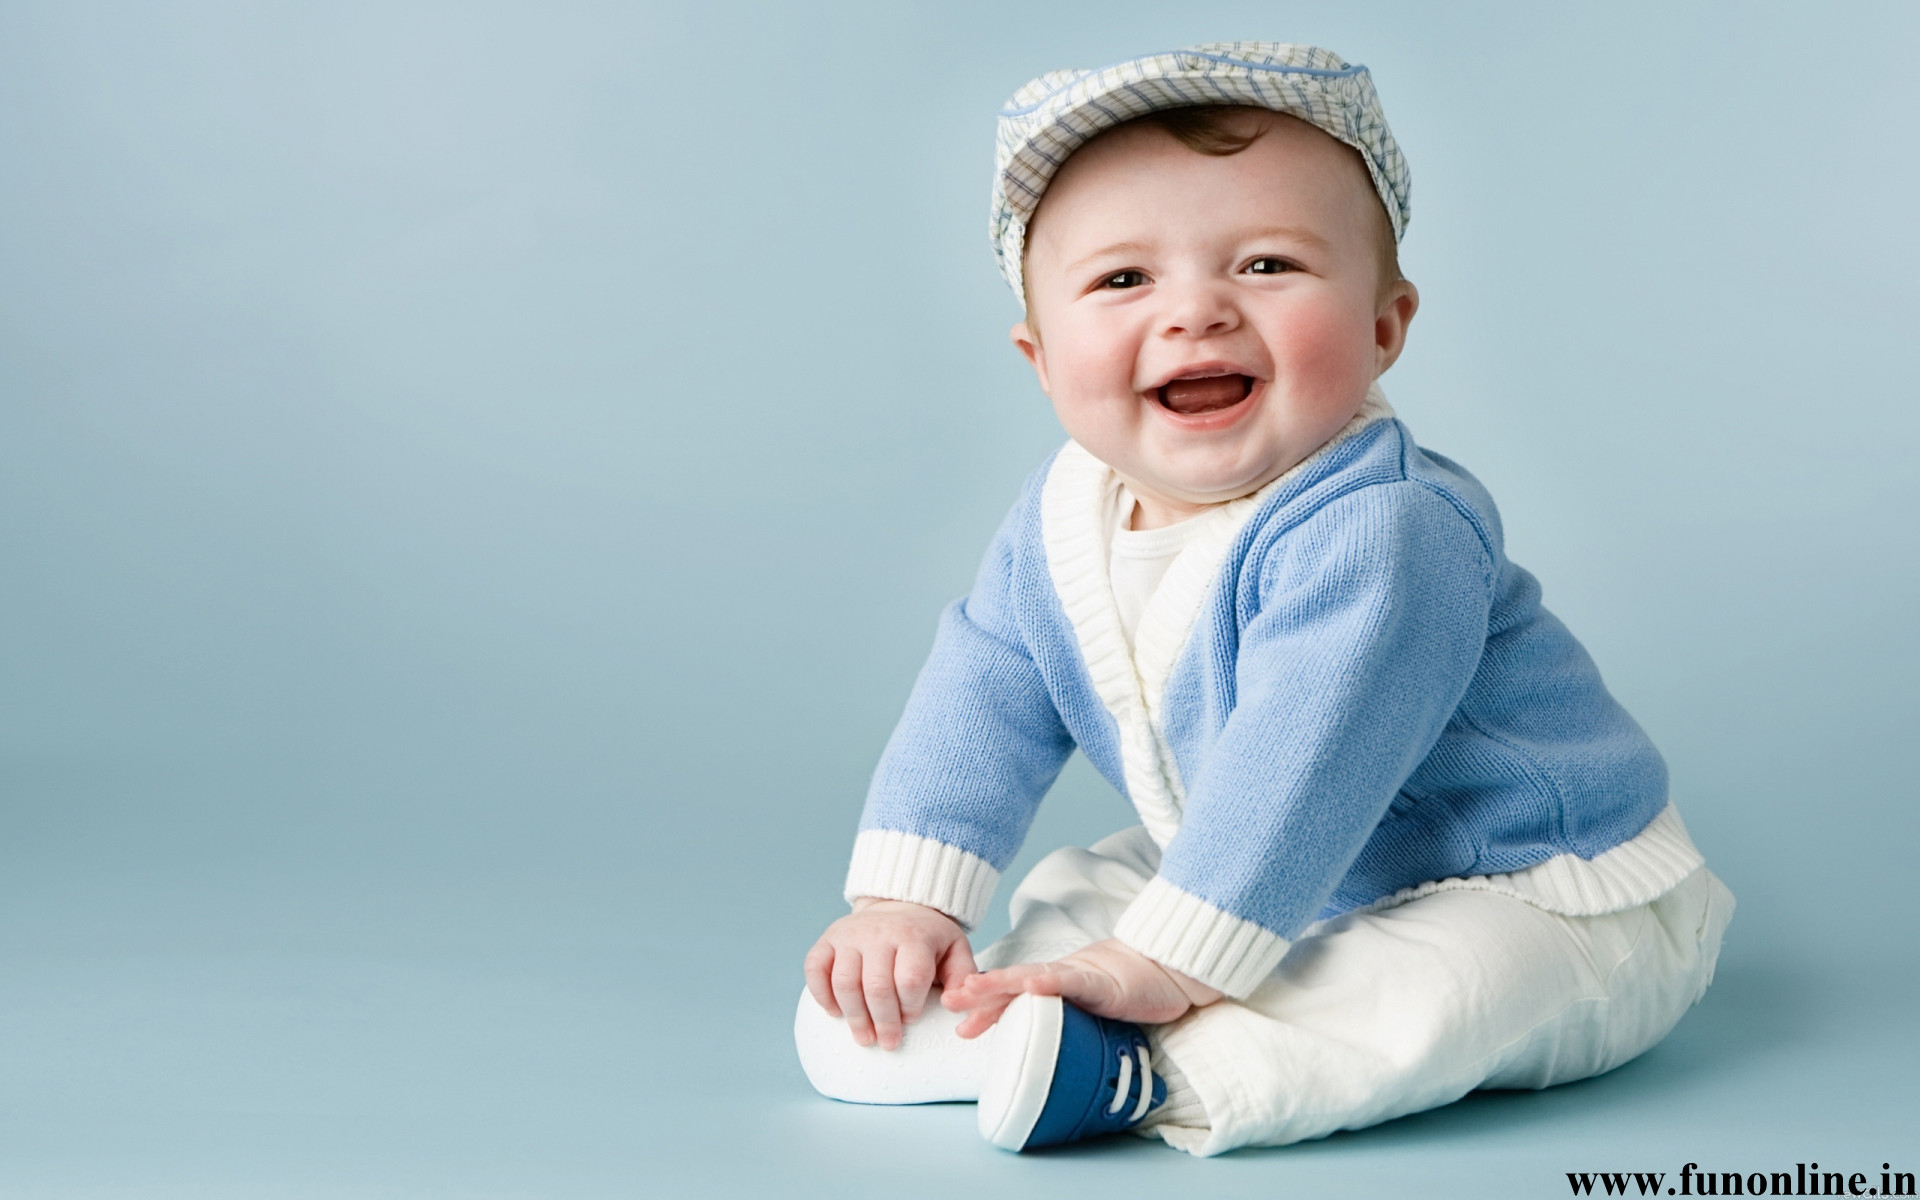  Baby Wallpapers Download Pretty and Smiling Babies HD Wallpaper